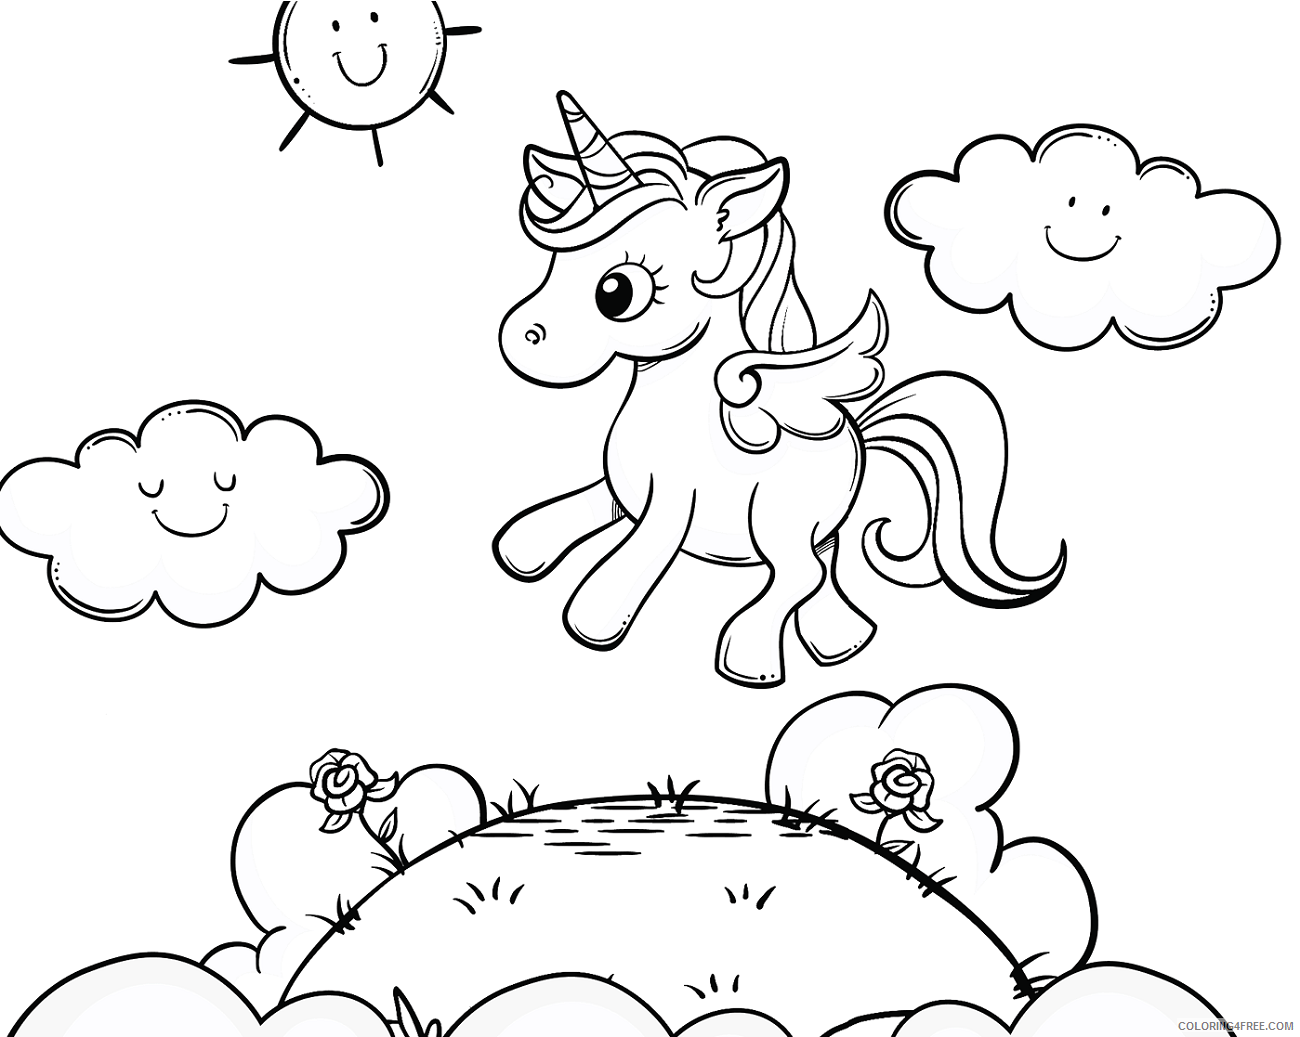 Winged Unicorn Coloring Pages baby_unicorn_flying Printable 2021 6292 Coloring4free